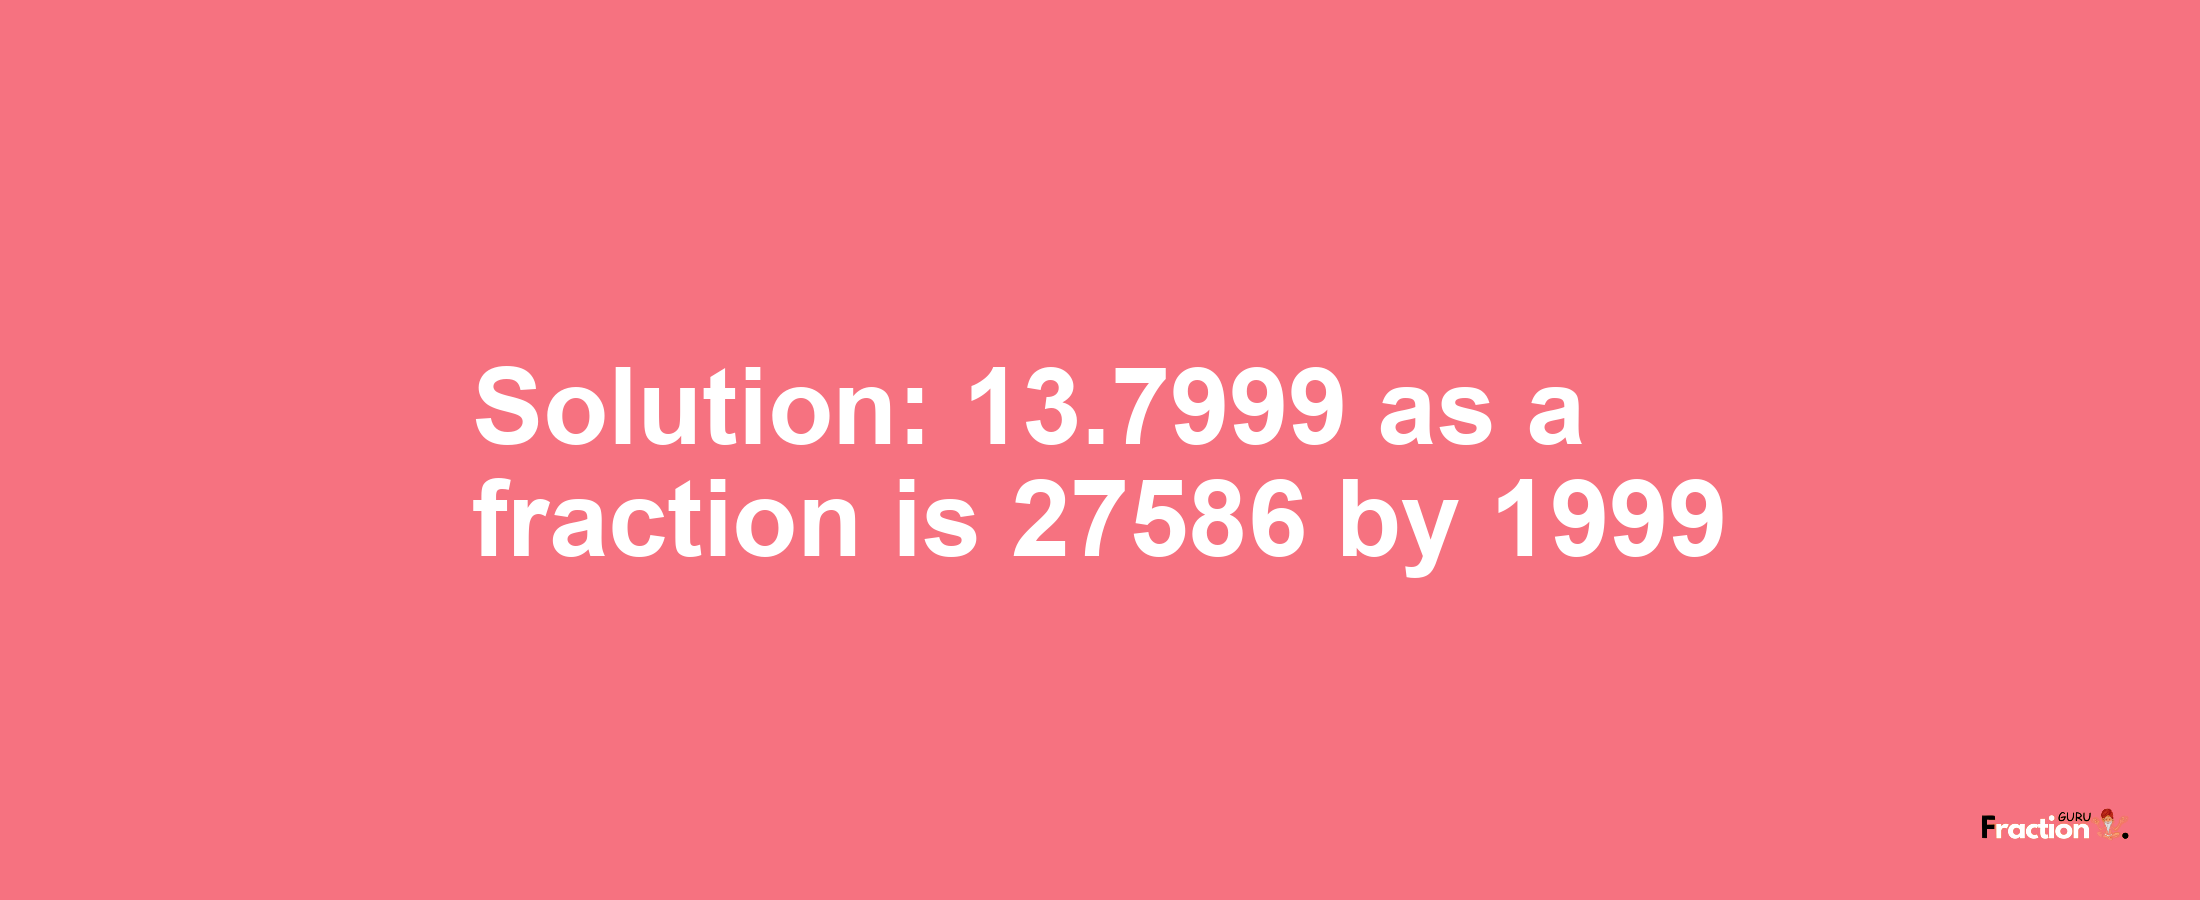 Solution:13.7999 as a fraction is 27586/1999